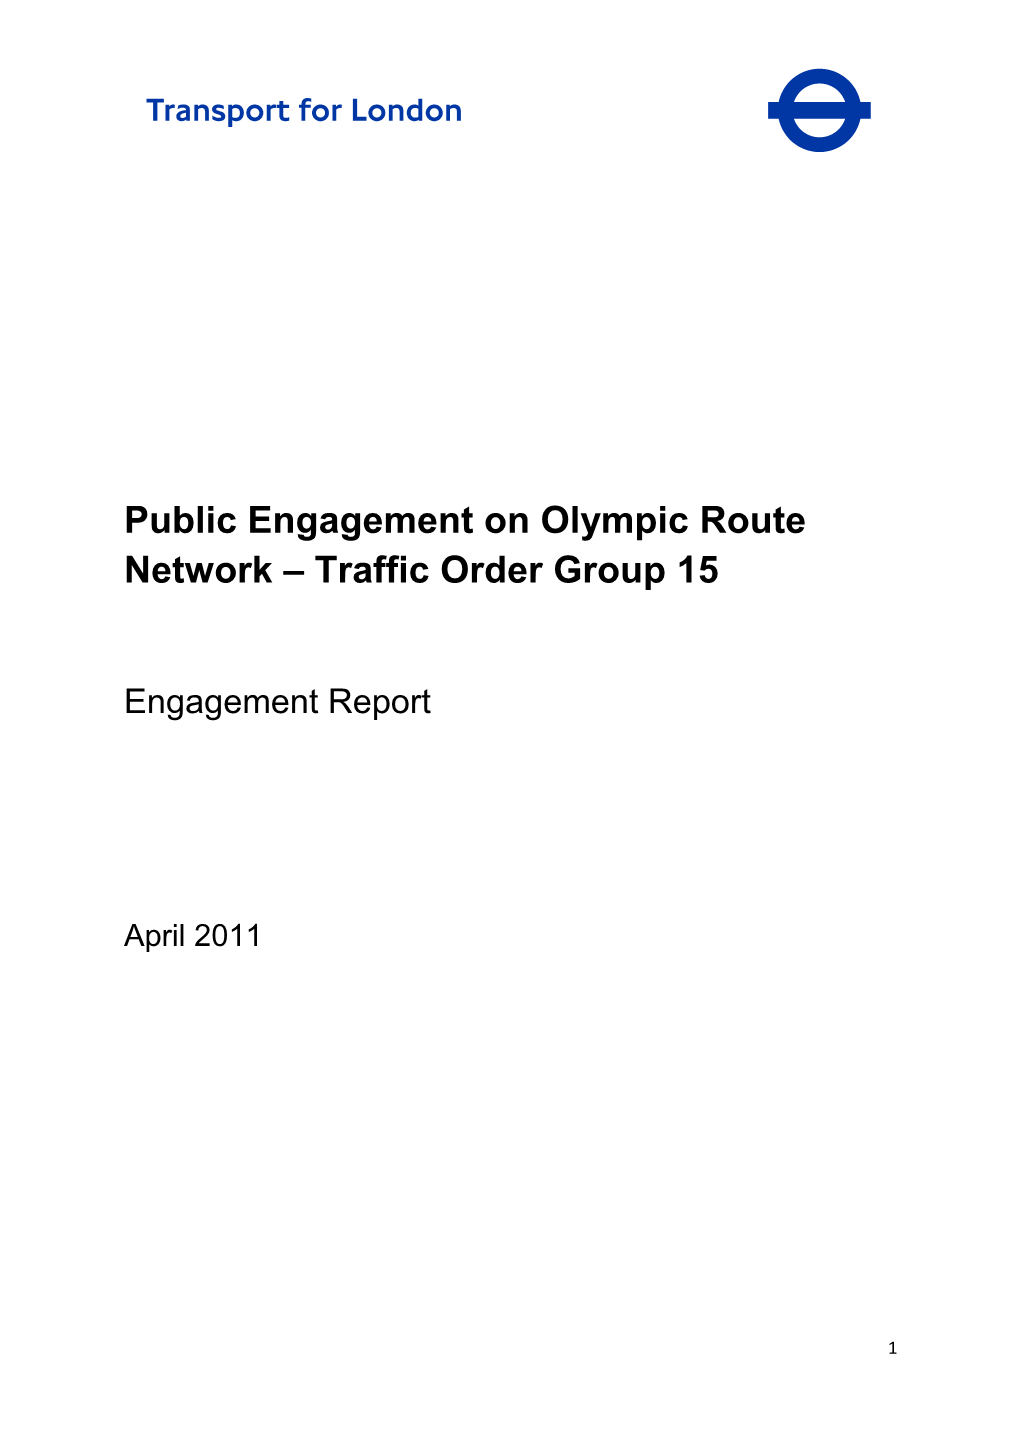 Public Engagement on Olympic Route Network – Traffic Order Group 15